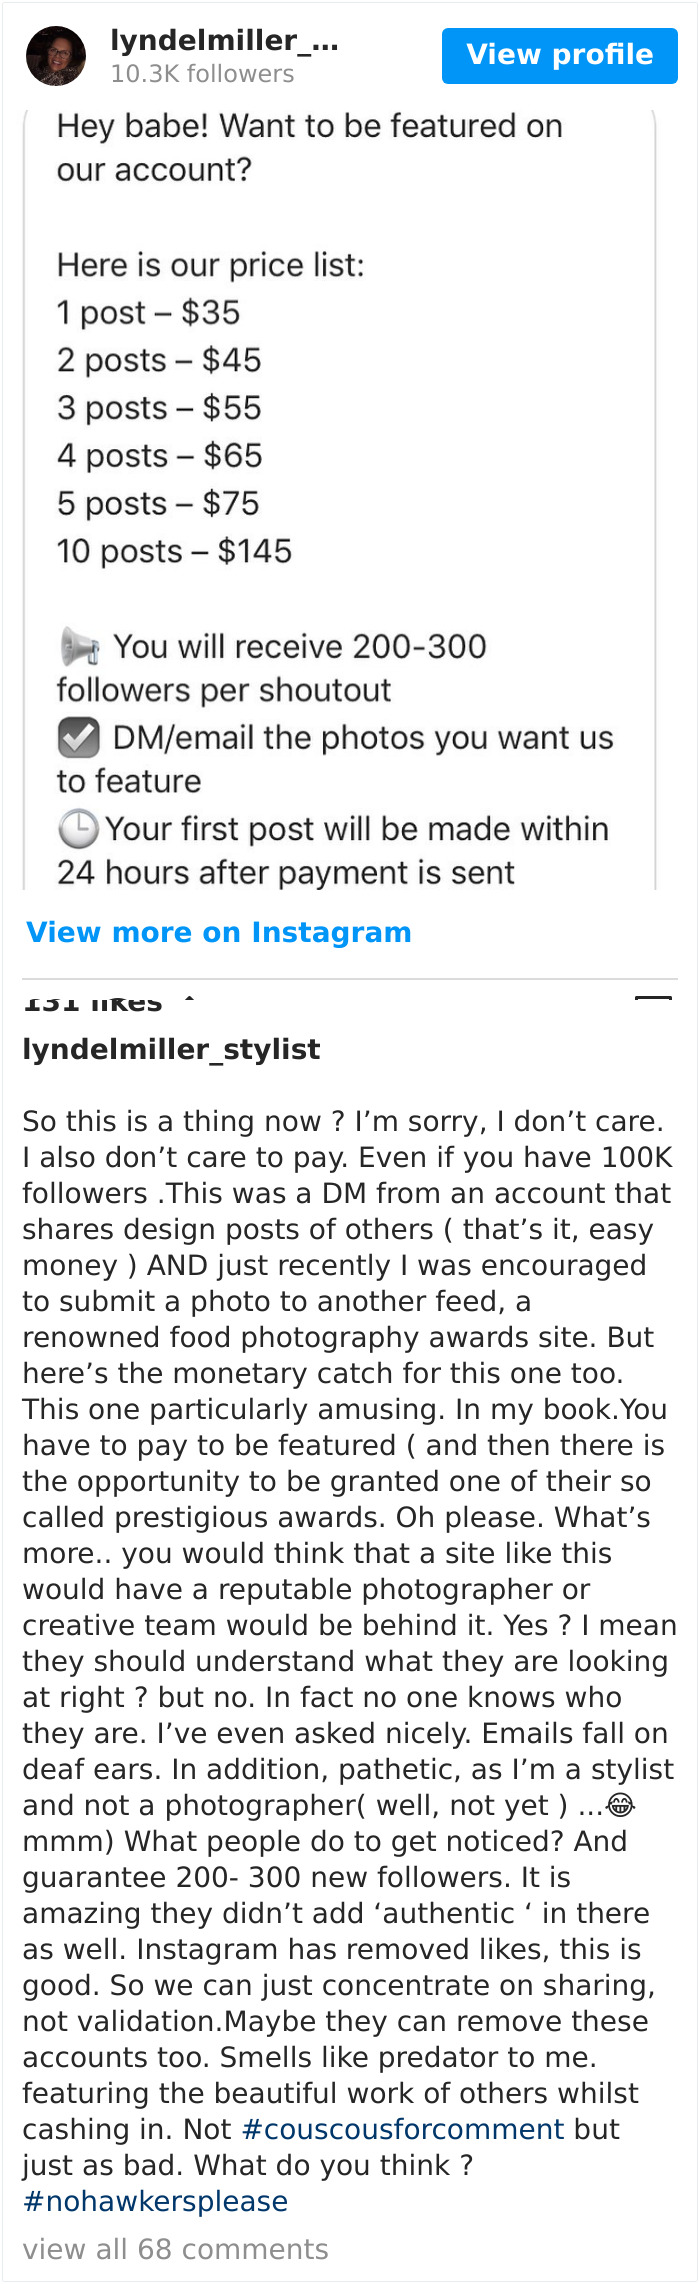 So This Is A Thing Now ? I’m Sorry, I Don’t Care. I Also Don’t Care To Pay. Even If You Have 100k Followers .this Was A Dm From An Account That Shares Design Posts Of Others ( That’s It, Easy Money ) And Just Recently I Was Encouraged To Submit A Photo To Another Feed, A Renowned Food Photography Awards Site. But Here’s The Monetary Catch For This One Too. This One Particularly Amusing. In My Book.you Have To Pay To Be Featured ( And Then There Is The Opportunity To Be Granted One Of Their So Called Prestigious Awards. Oh Please. What’s More.. You Would Think That A Site Like This Would Have A Reputable Photographer Or Creative Team Would Be Behind It. Yes ? I Mean They Should Understand What They Are Looking At Right ? But No. In Fact No One Knows Who They Are. I’ve Even Asked Nicely. Emails Fall On Deaf Ears. In Addition, Pathetic, As I’m A Stylist And Not A Photographer( Well, Not Yet ) ...😂mmm) What People Do To Get Noticed? And Guarantee 200- 300 New Followers. It Is Amazing They Didn’t Add ‘Authentic ‘ In There As Well. Instagram Has Removed Likes, This Is Good. So We Can Just Concentrate On Sharing, Not Validation.maybe They Can Remove These Accounts Too. Smells Like Predator To Me. Featuring The Beautiful Work Of Others Whilst Cashing In. Not #couscousforcomment But Just As Bad. What Do You Think ? #nohawkersplease